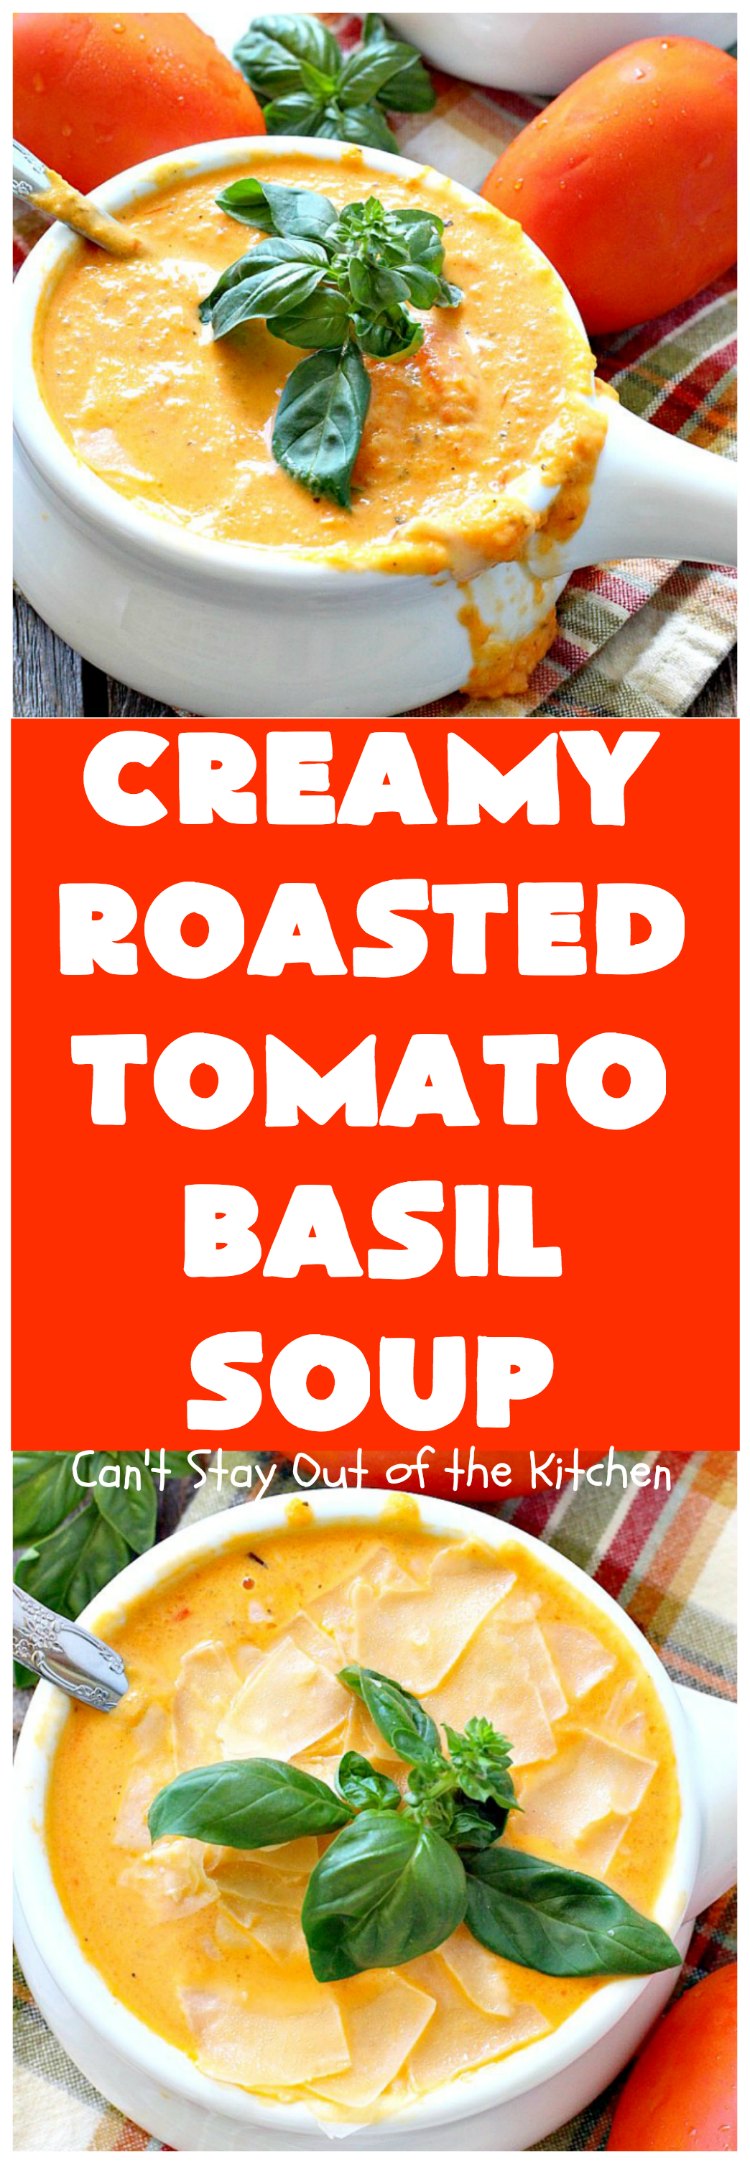 Creamy Roasted Tomato Basil Soup | Can't Stay Out of the Kitchen